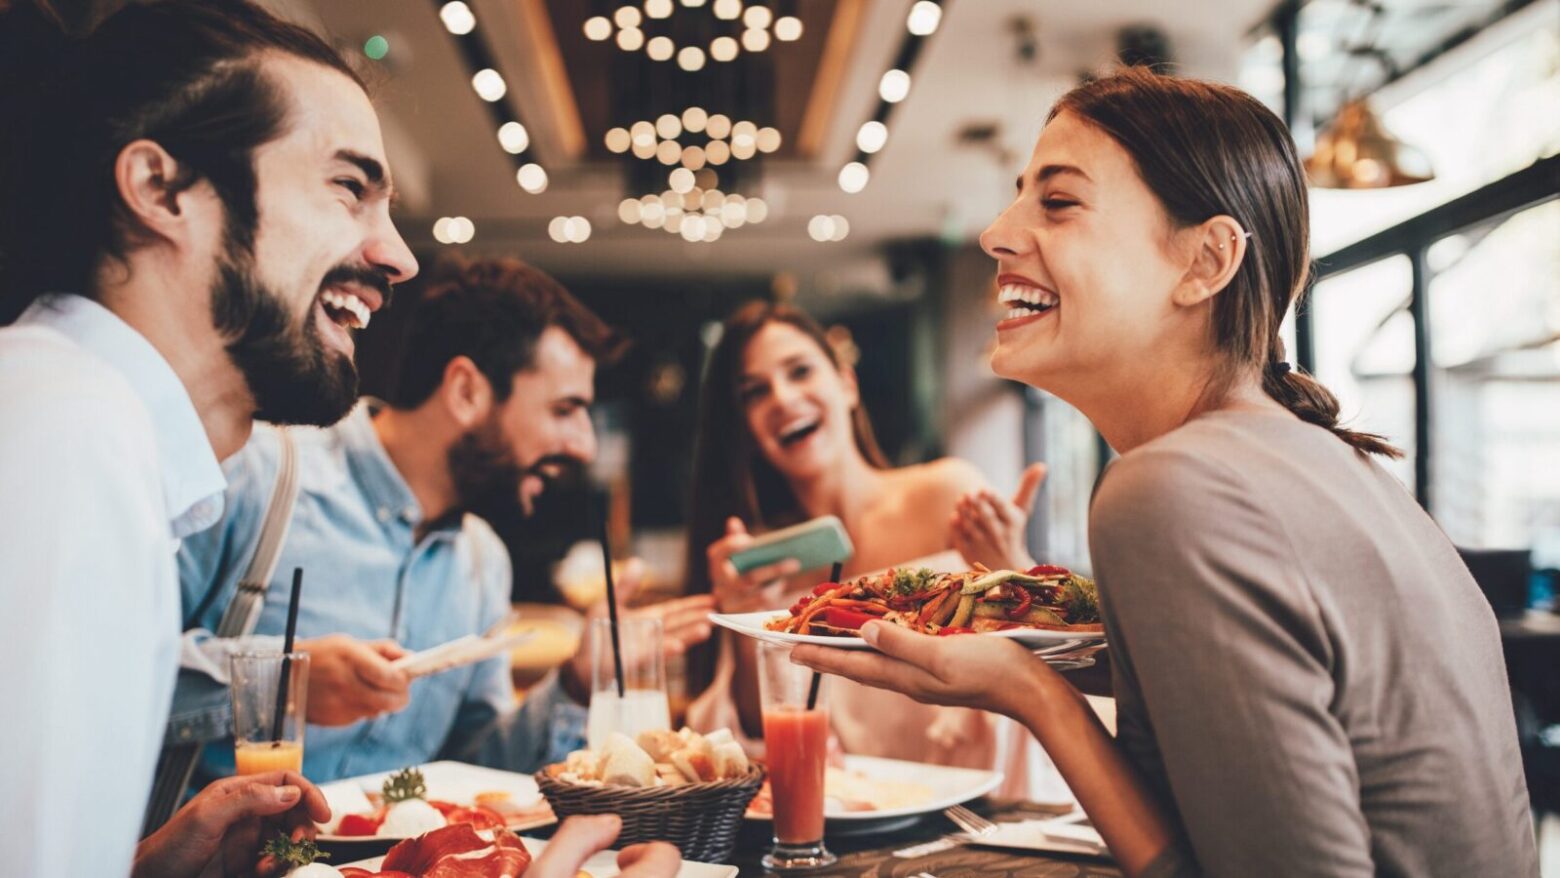 A happy group of people eating healthy food at a restaurant.